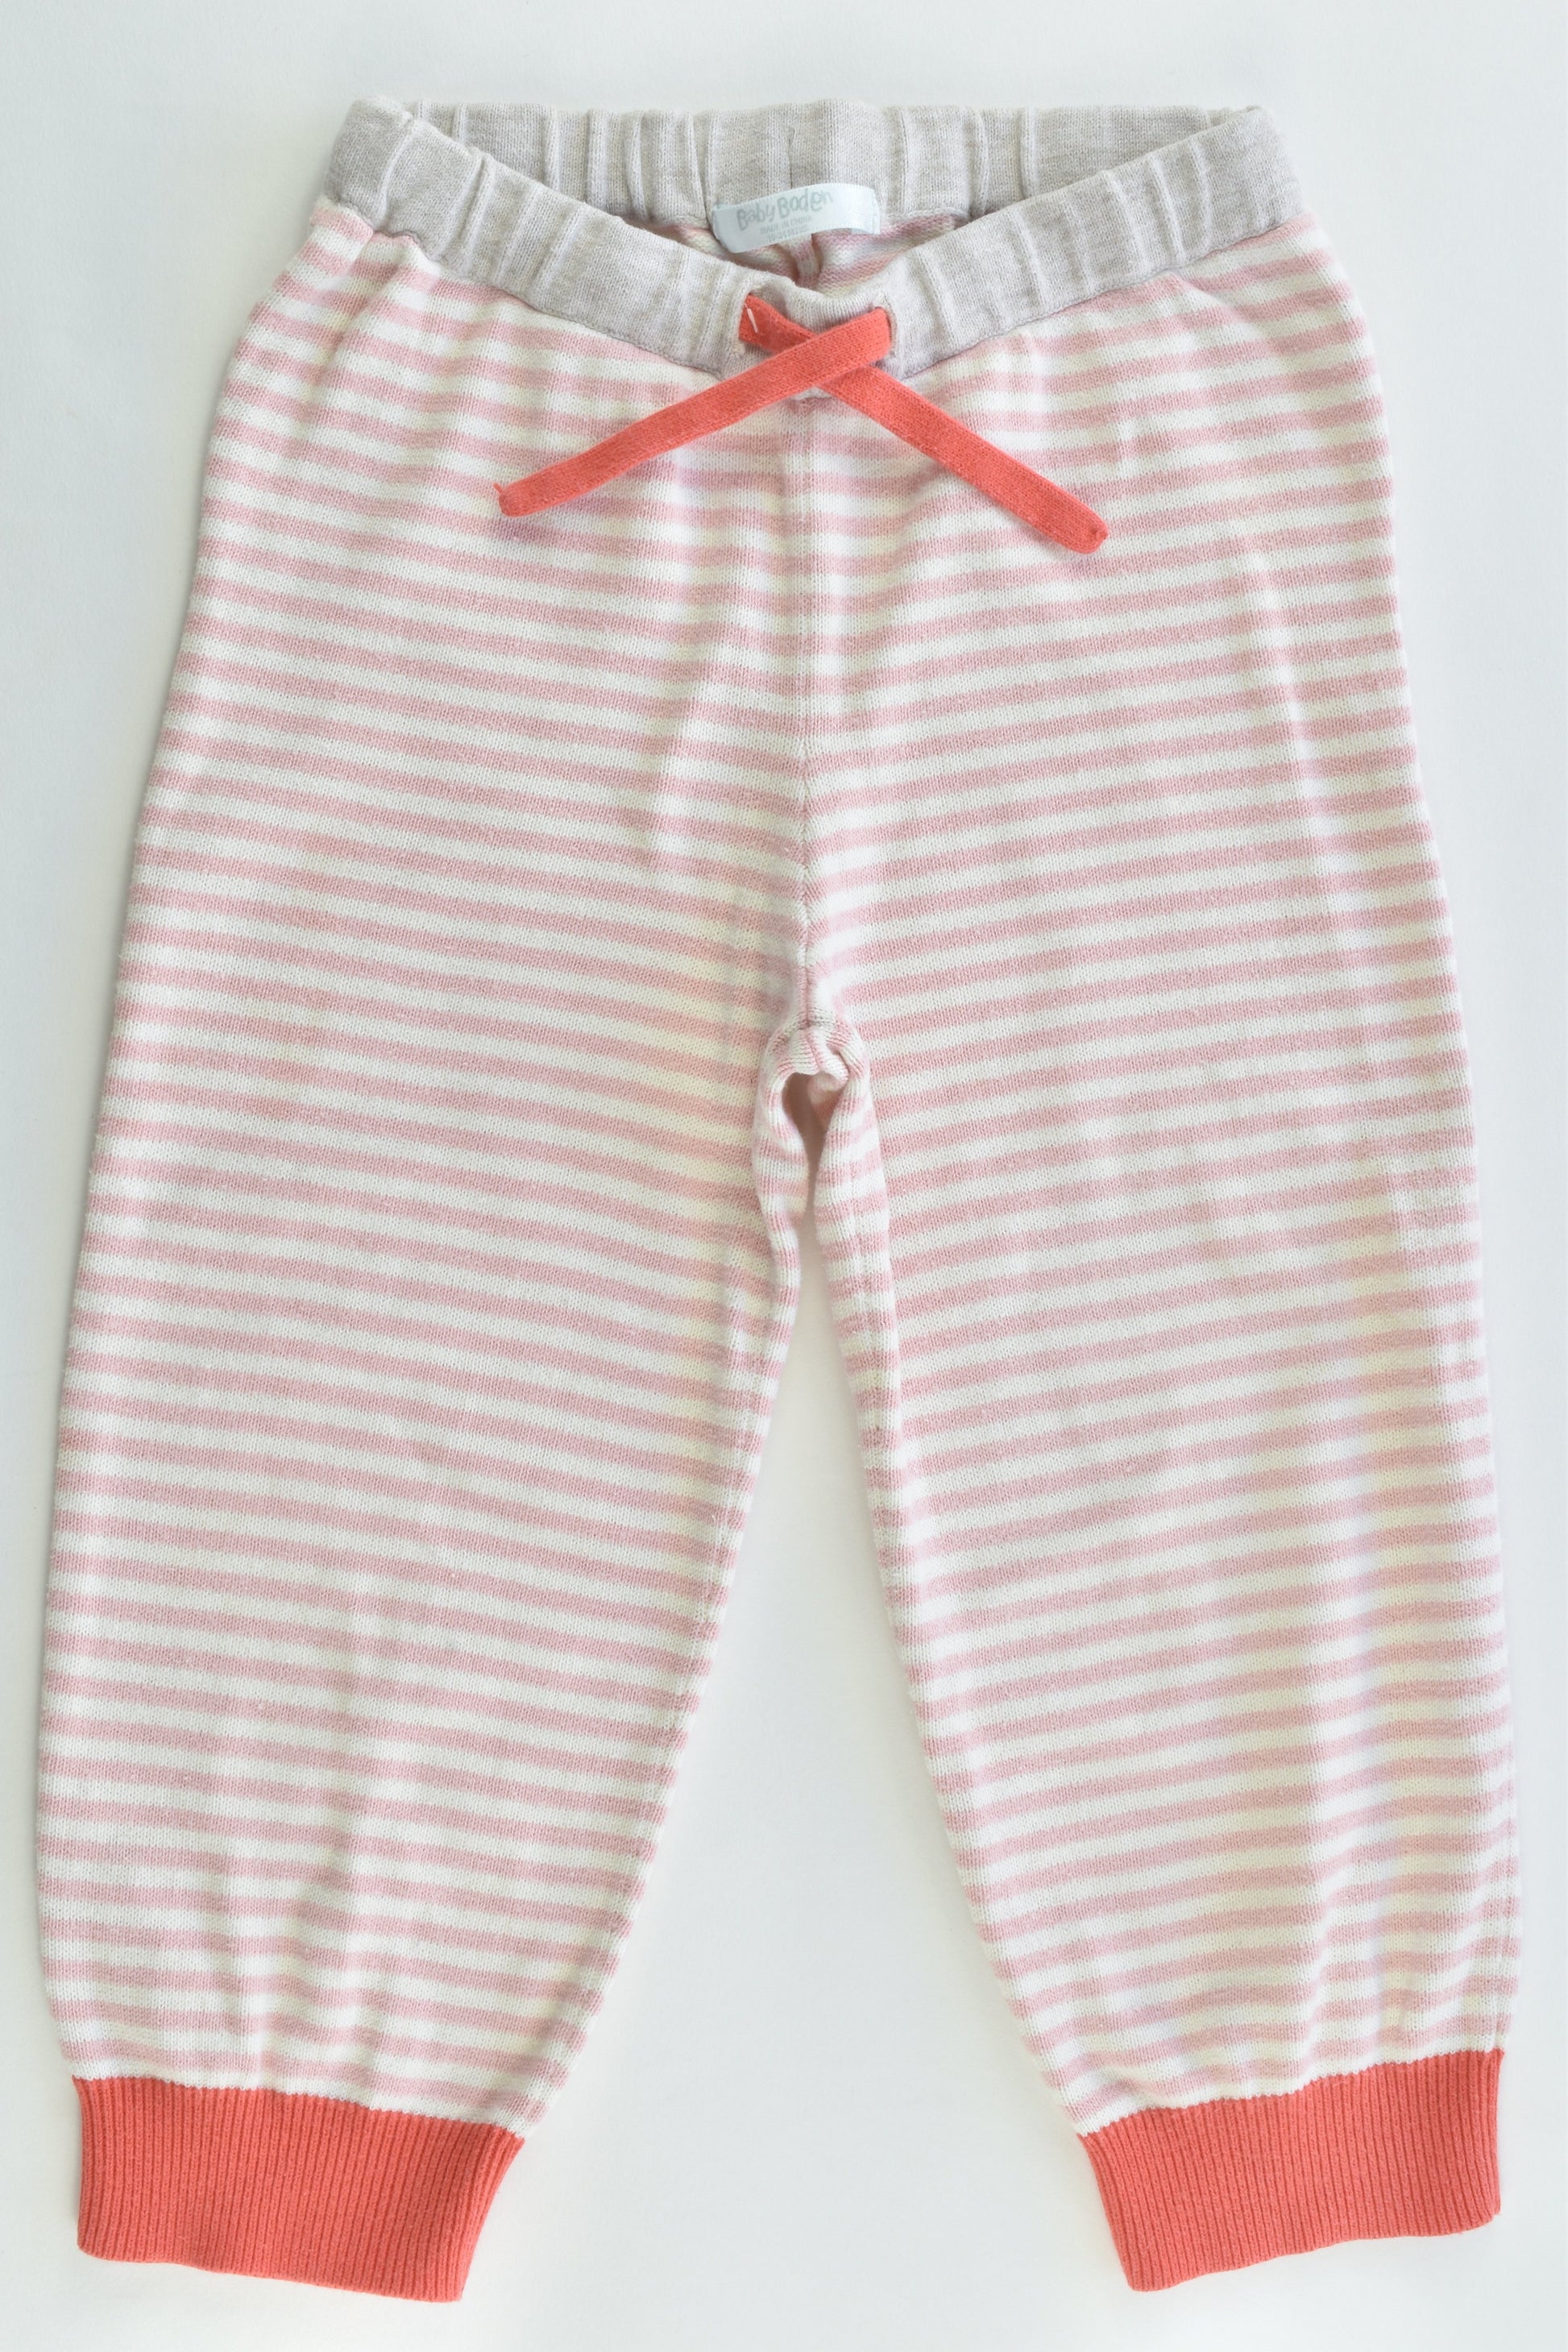 Baby Boden Size 18-24 months Knitted Pants